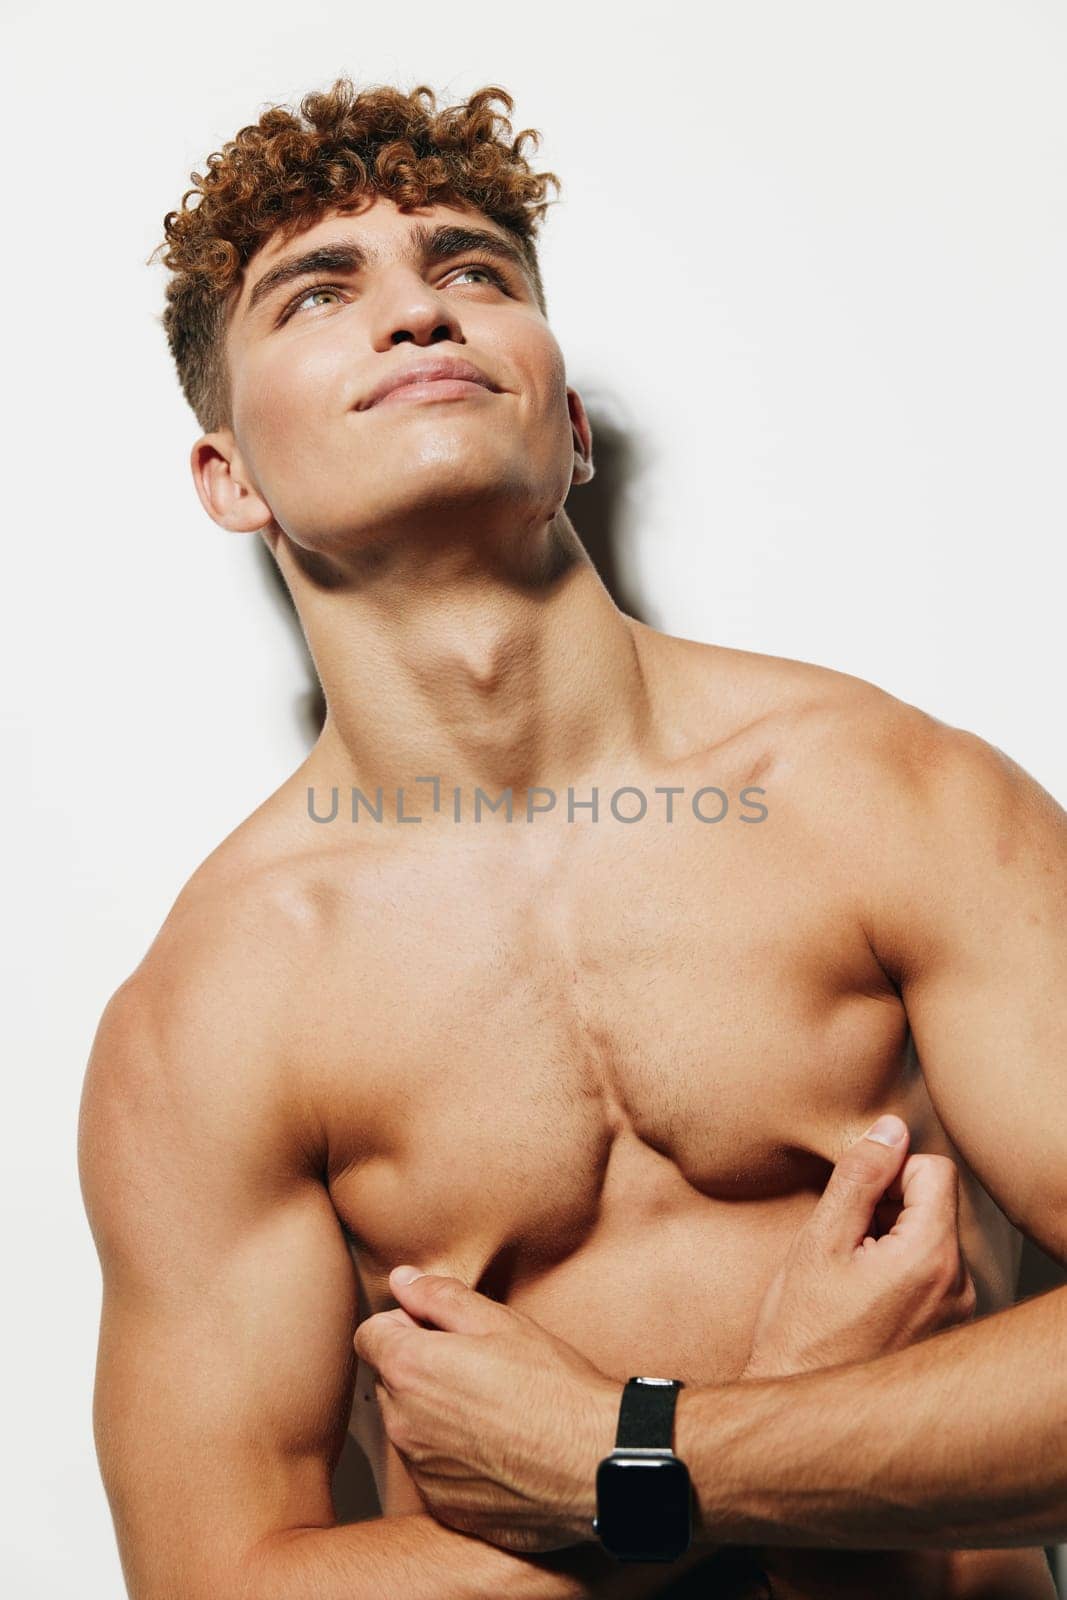 man attractive beauty adult care gray background smile young torso healthy fit athletic fitness by SHOTPRIME